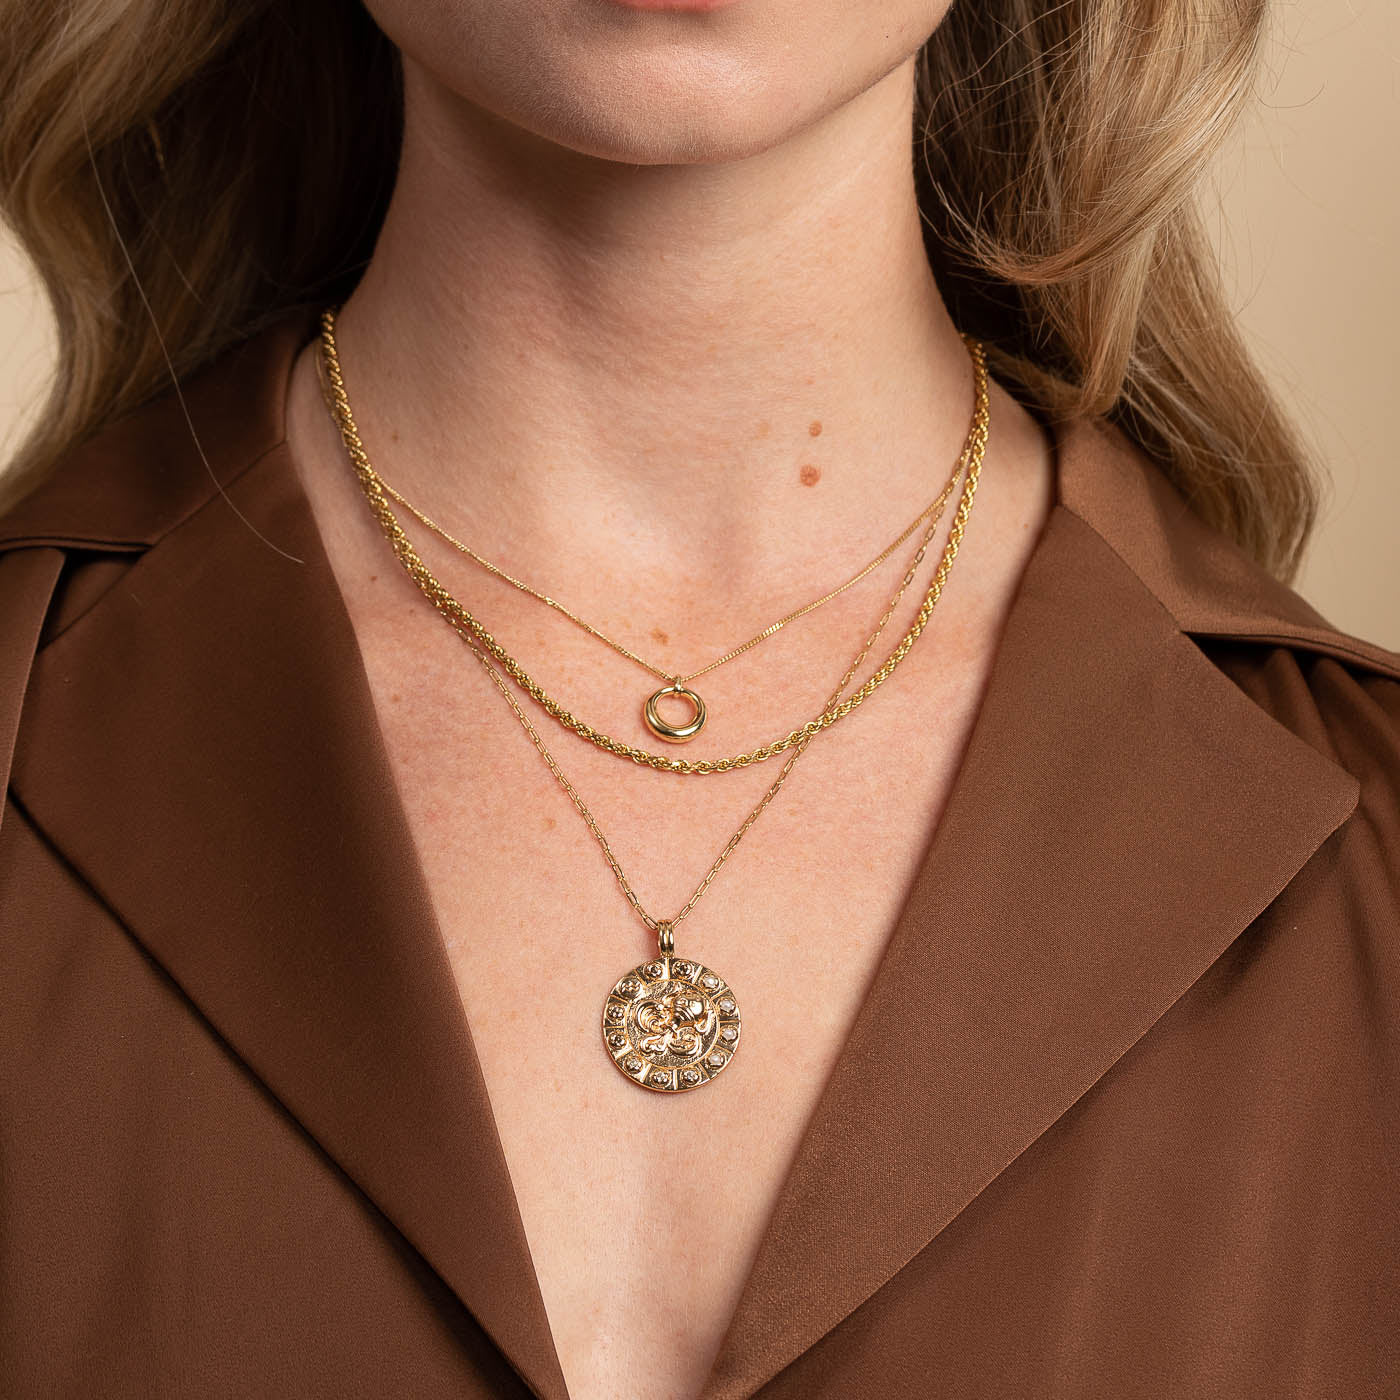 Bold Zodiac Aquarius Pendant Necklace in Gold worn layered with rope chain necklace and bold halo necklace